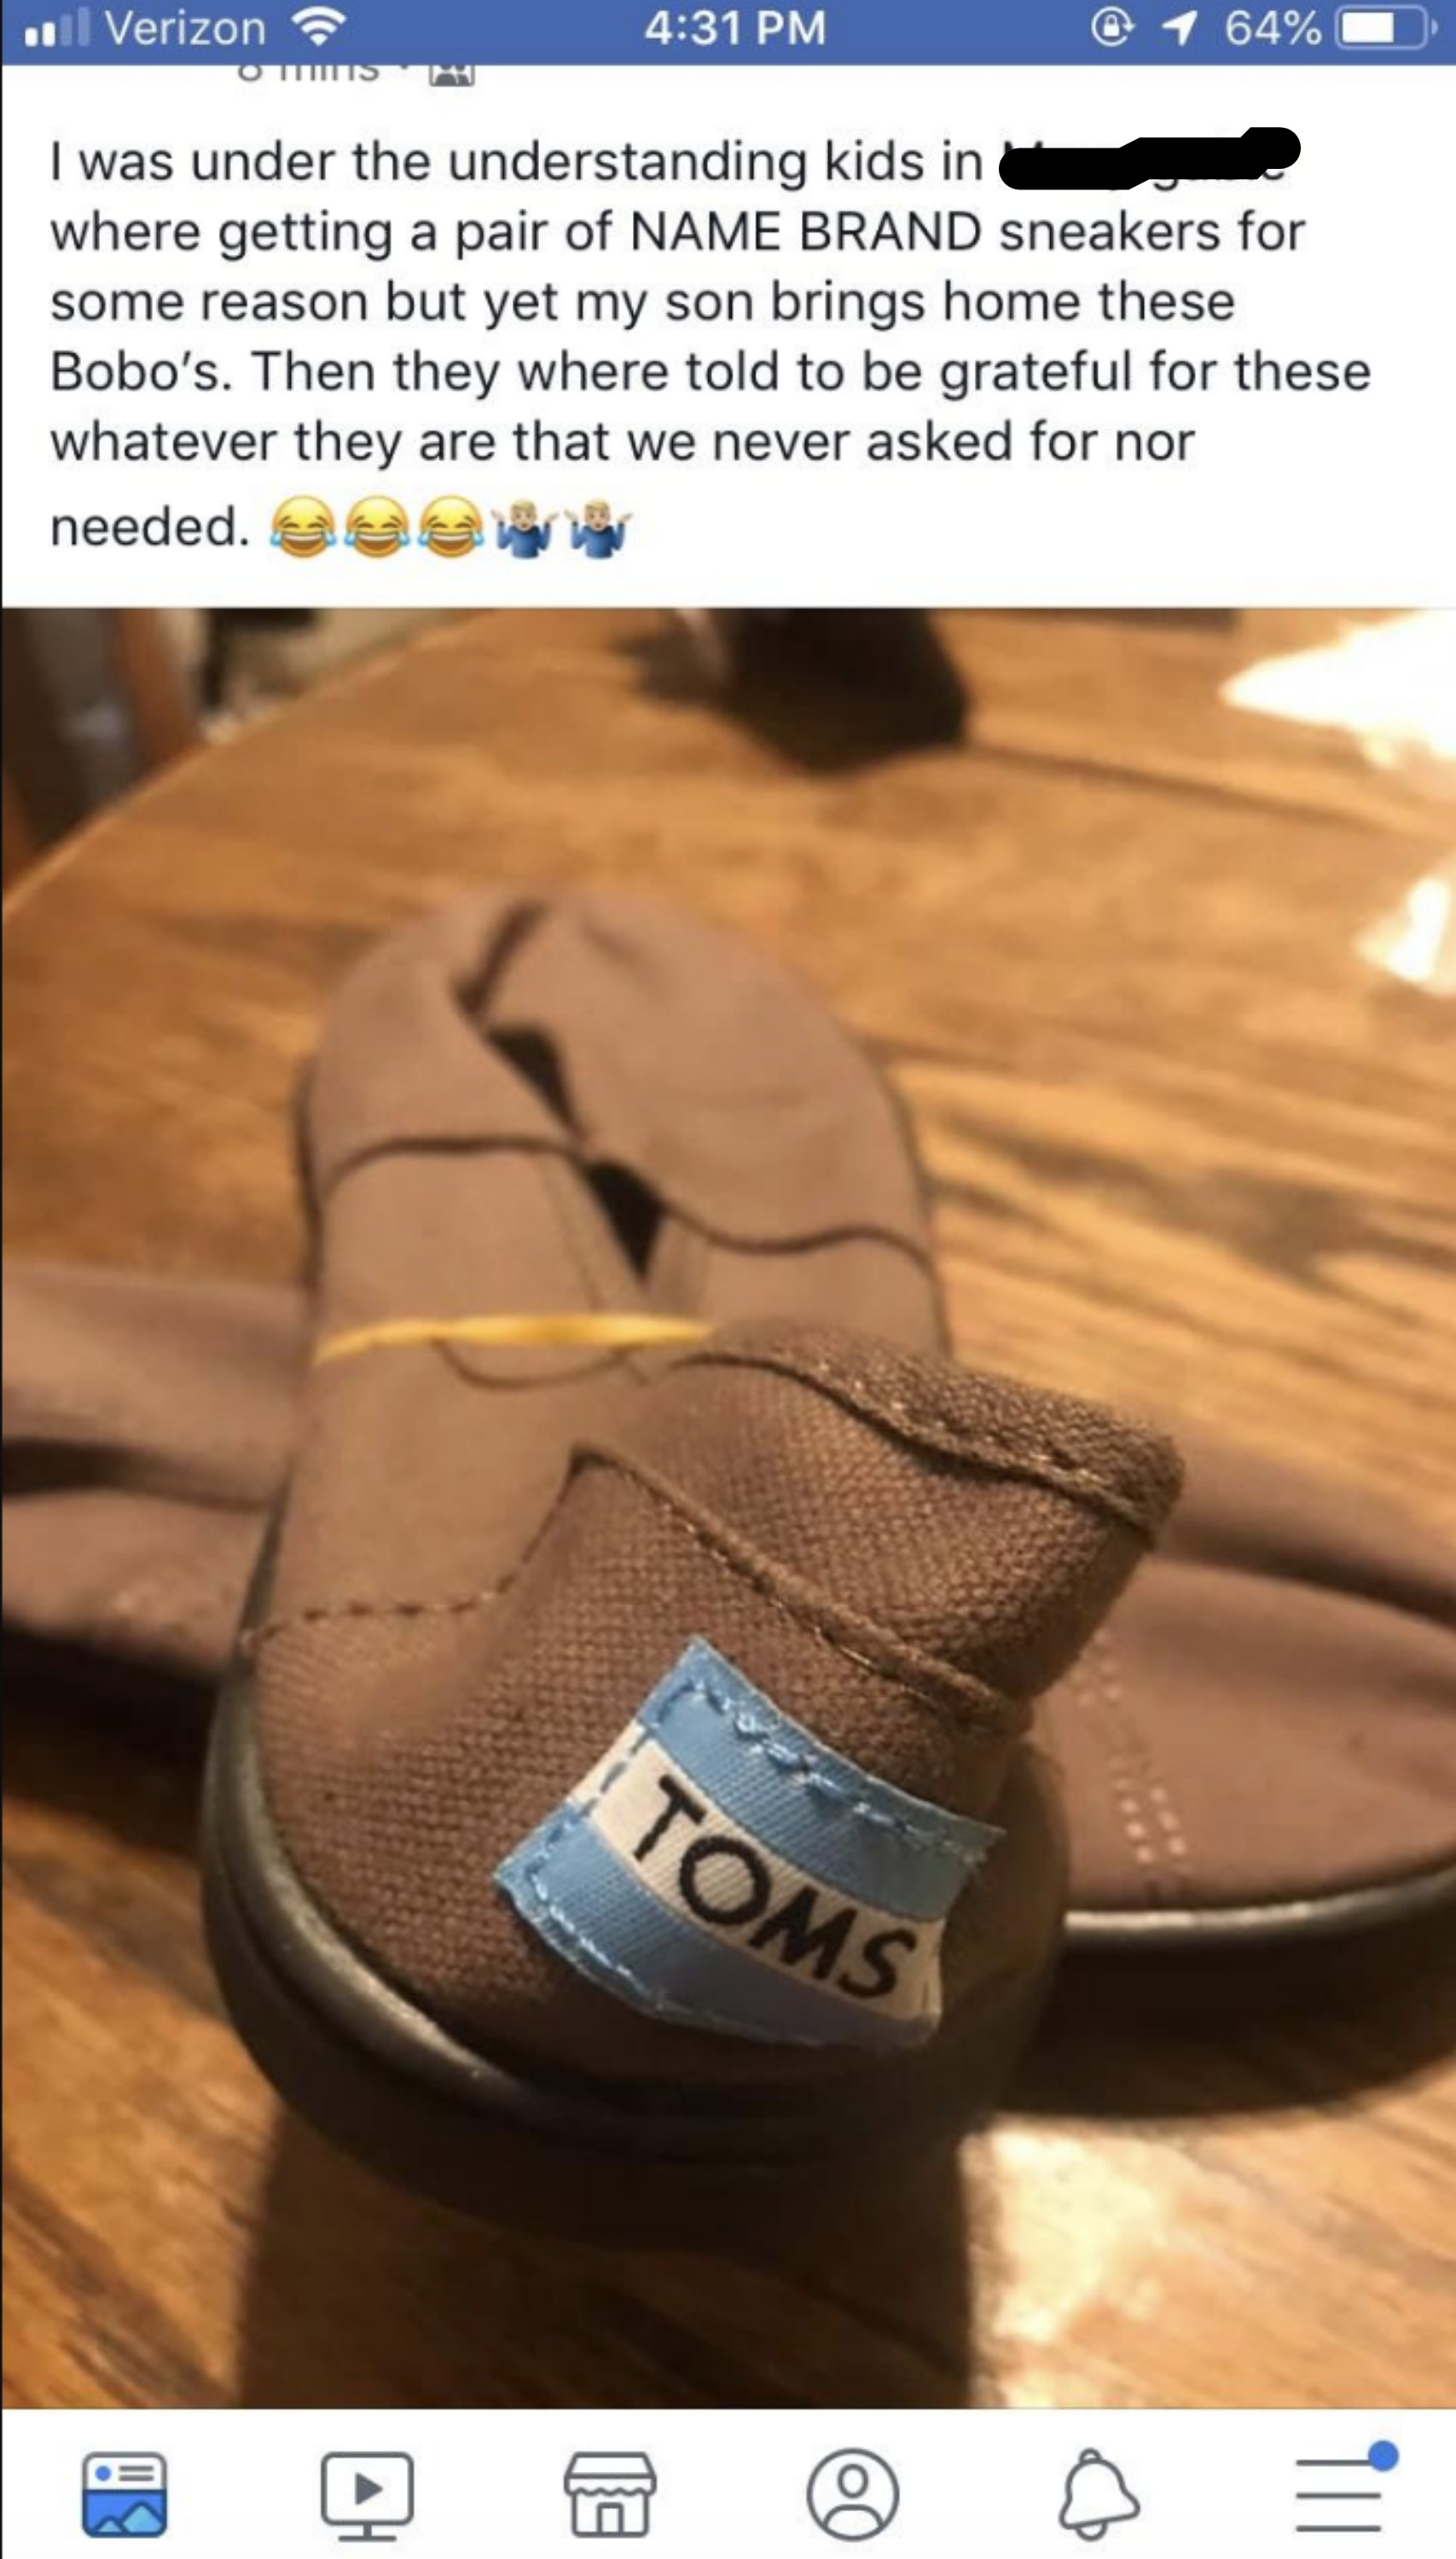 She posts a photo of Toms shoes and says she was under the impression her kids were getting name-brand sneakers